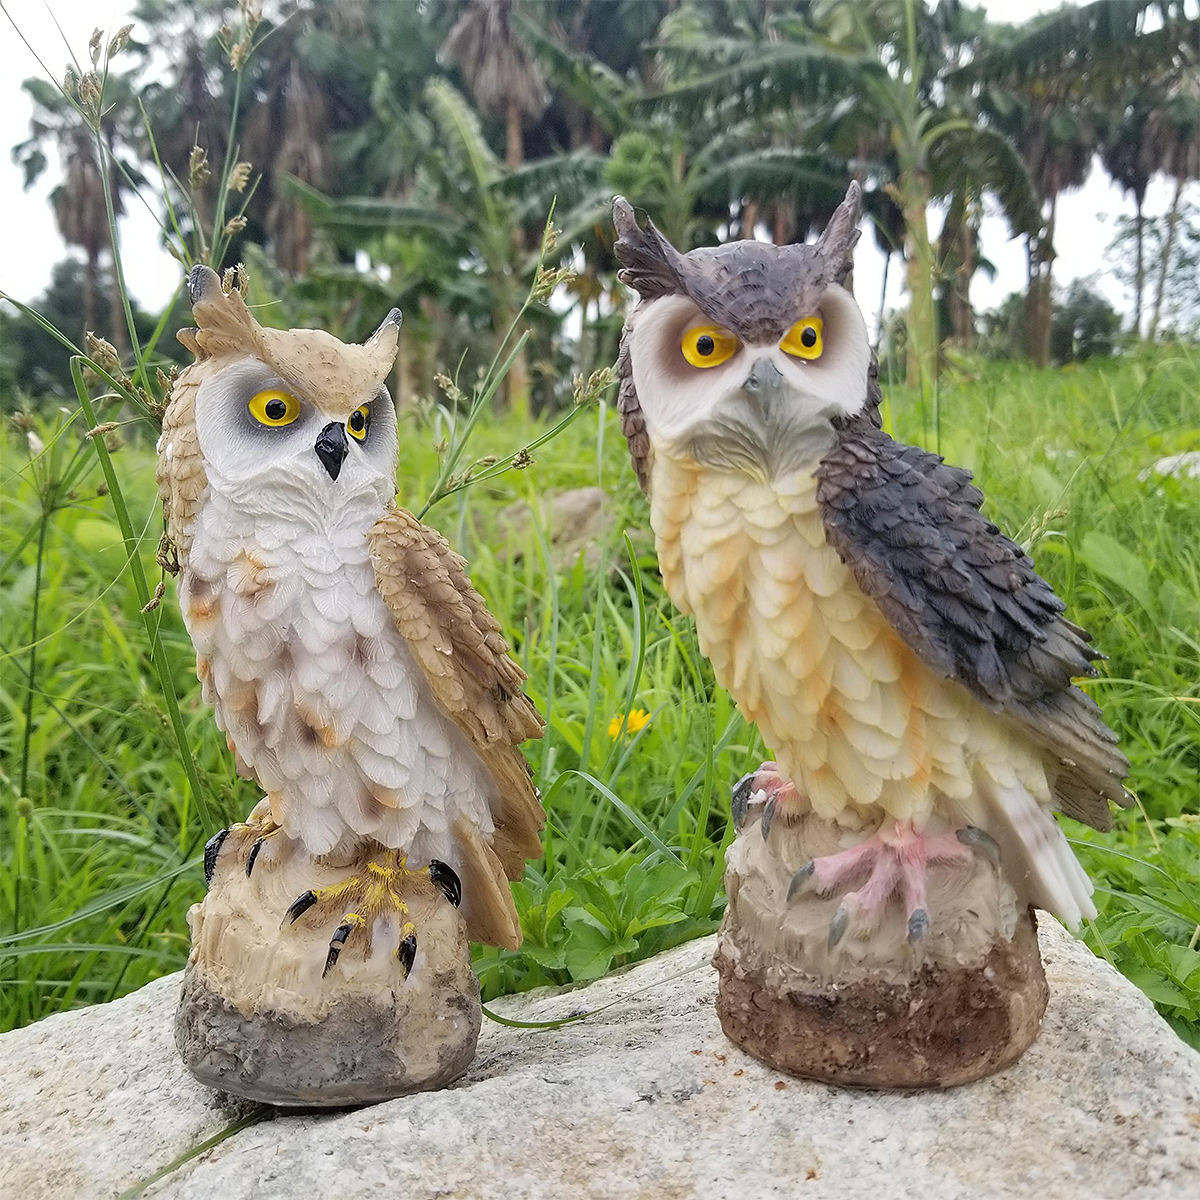 

Synthetic Resin Owl Outdoor Hunting Decoy Garden Yard Landscape Decorations